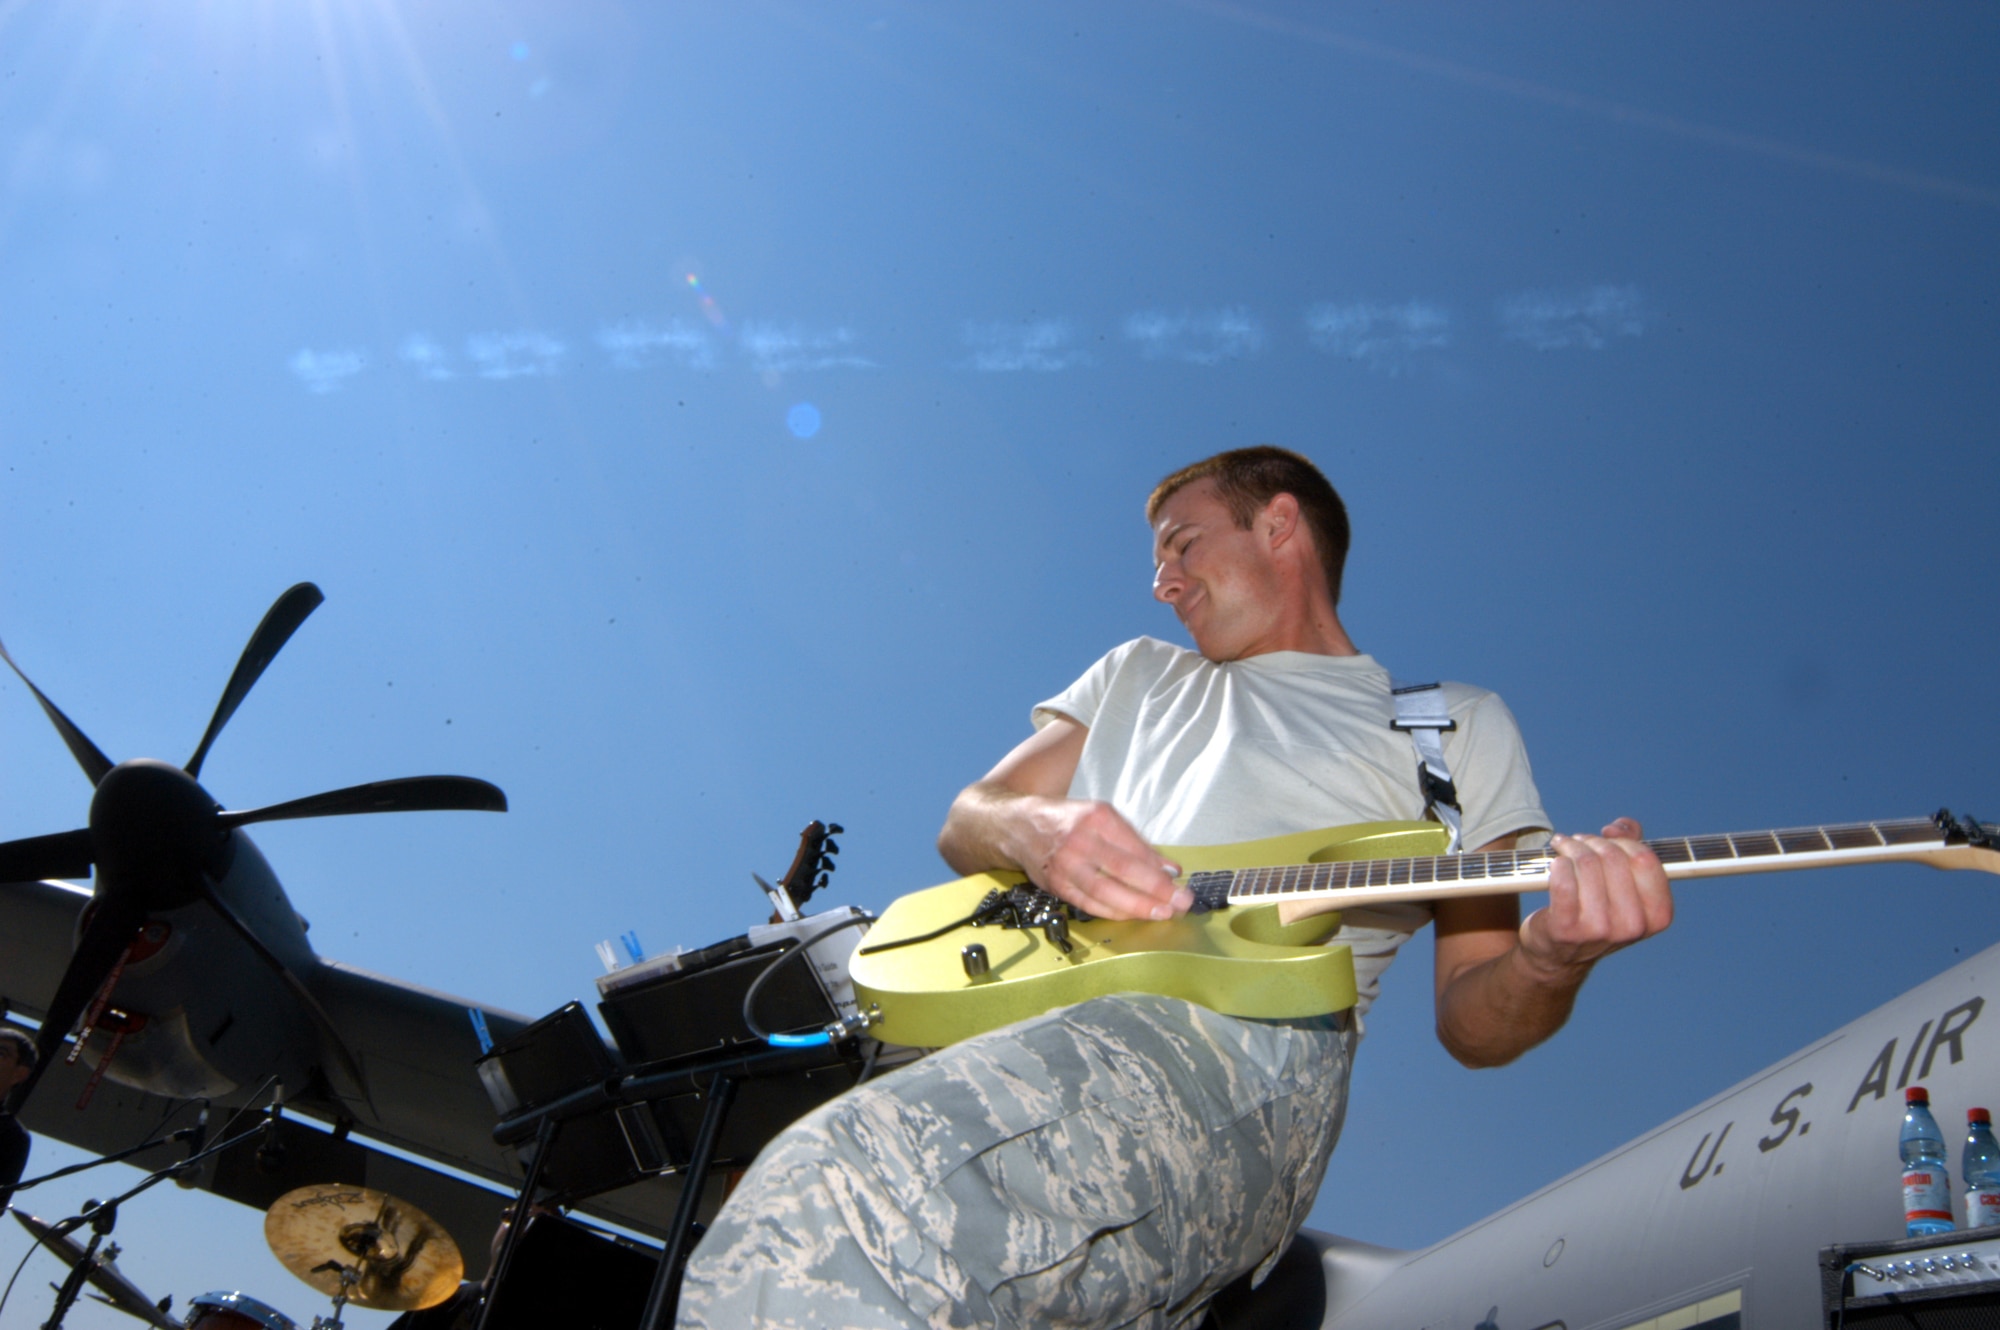 SANTIAGO, Chile -- Airman 1st Class Aaron Kusterer rips a guitar solo during a performance at FIDAE 2008 April 5.  Airman Kusterer is a member of the Air National Guard Band of the Central States.  The band as well as a host of other Airmen and aircraft were part of the South American air show and Exercise Newen 2008.  The exercise emphasizes cooperation and partnerships between the U.S. and Chilean militaries. (U.S. Air Force photo/Master Sgt. Jason Tudor)